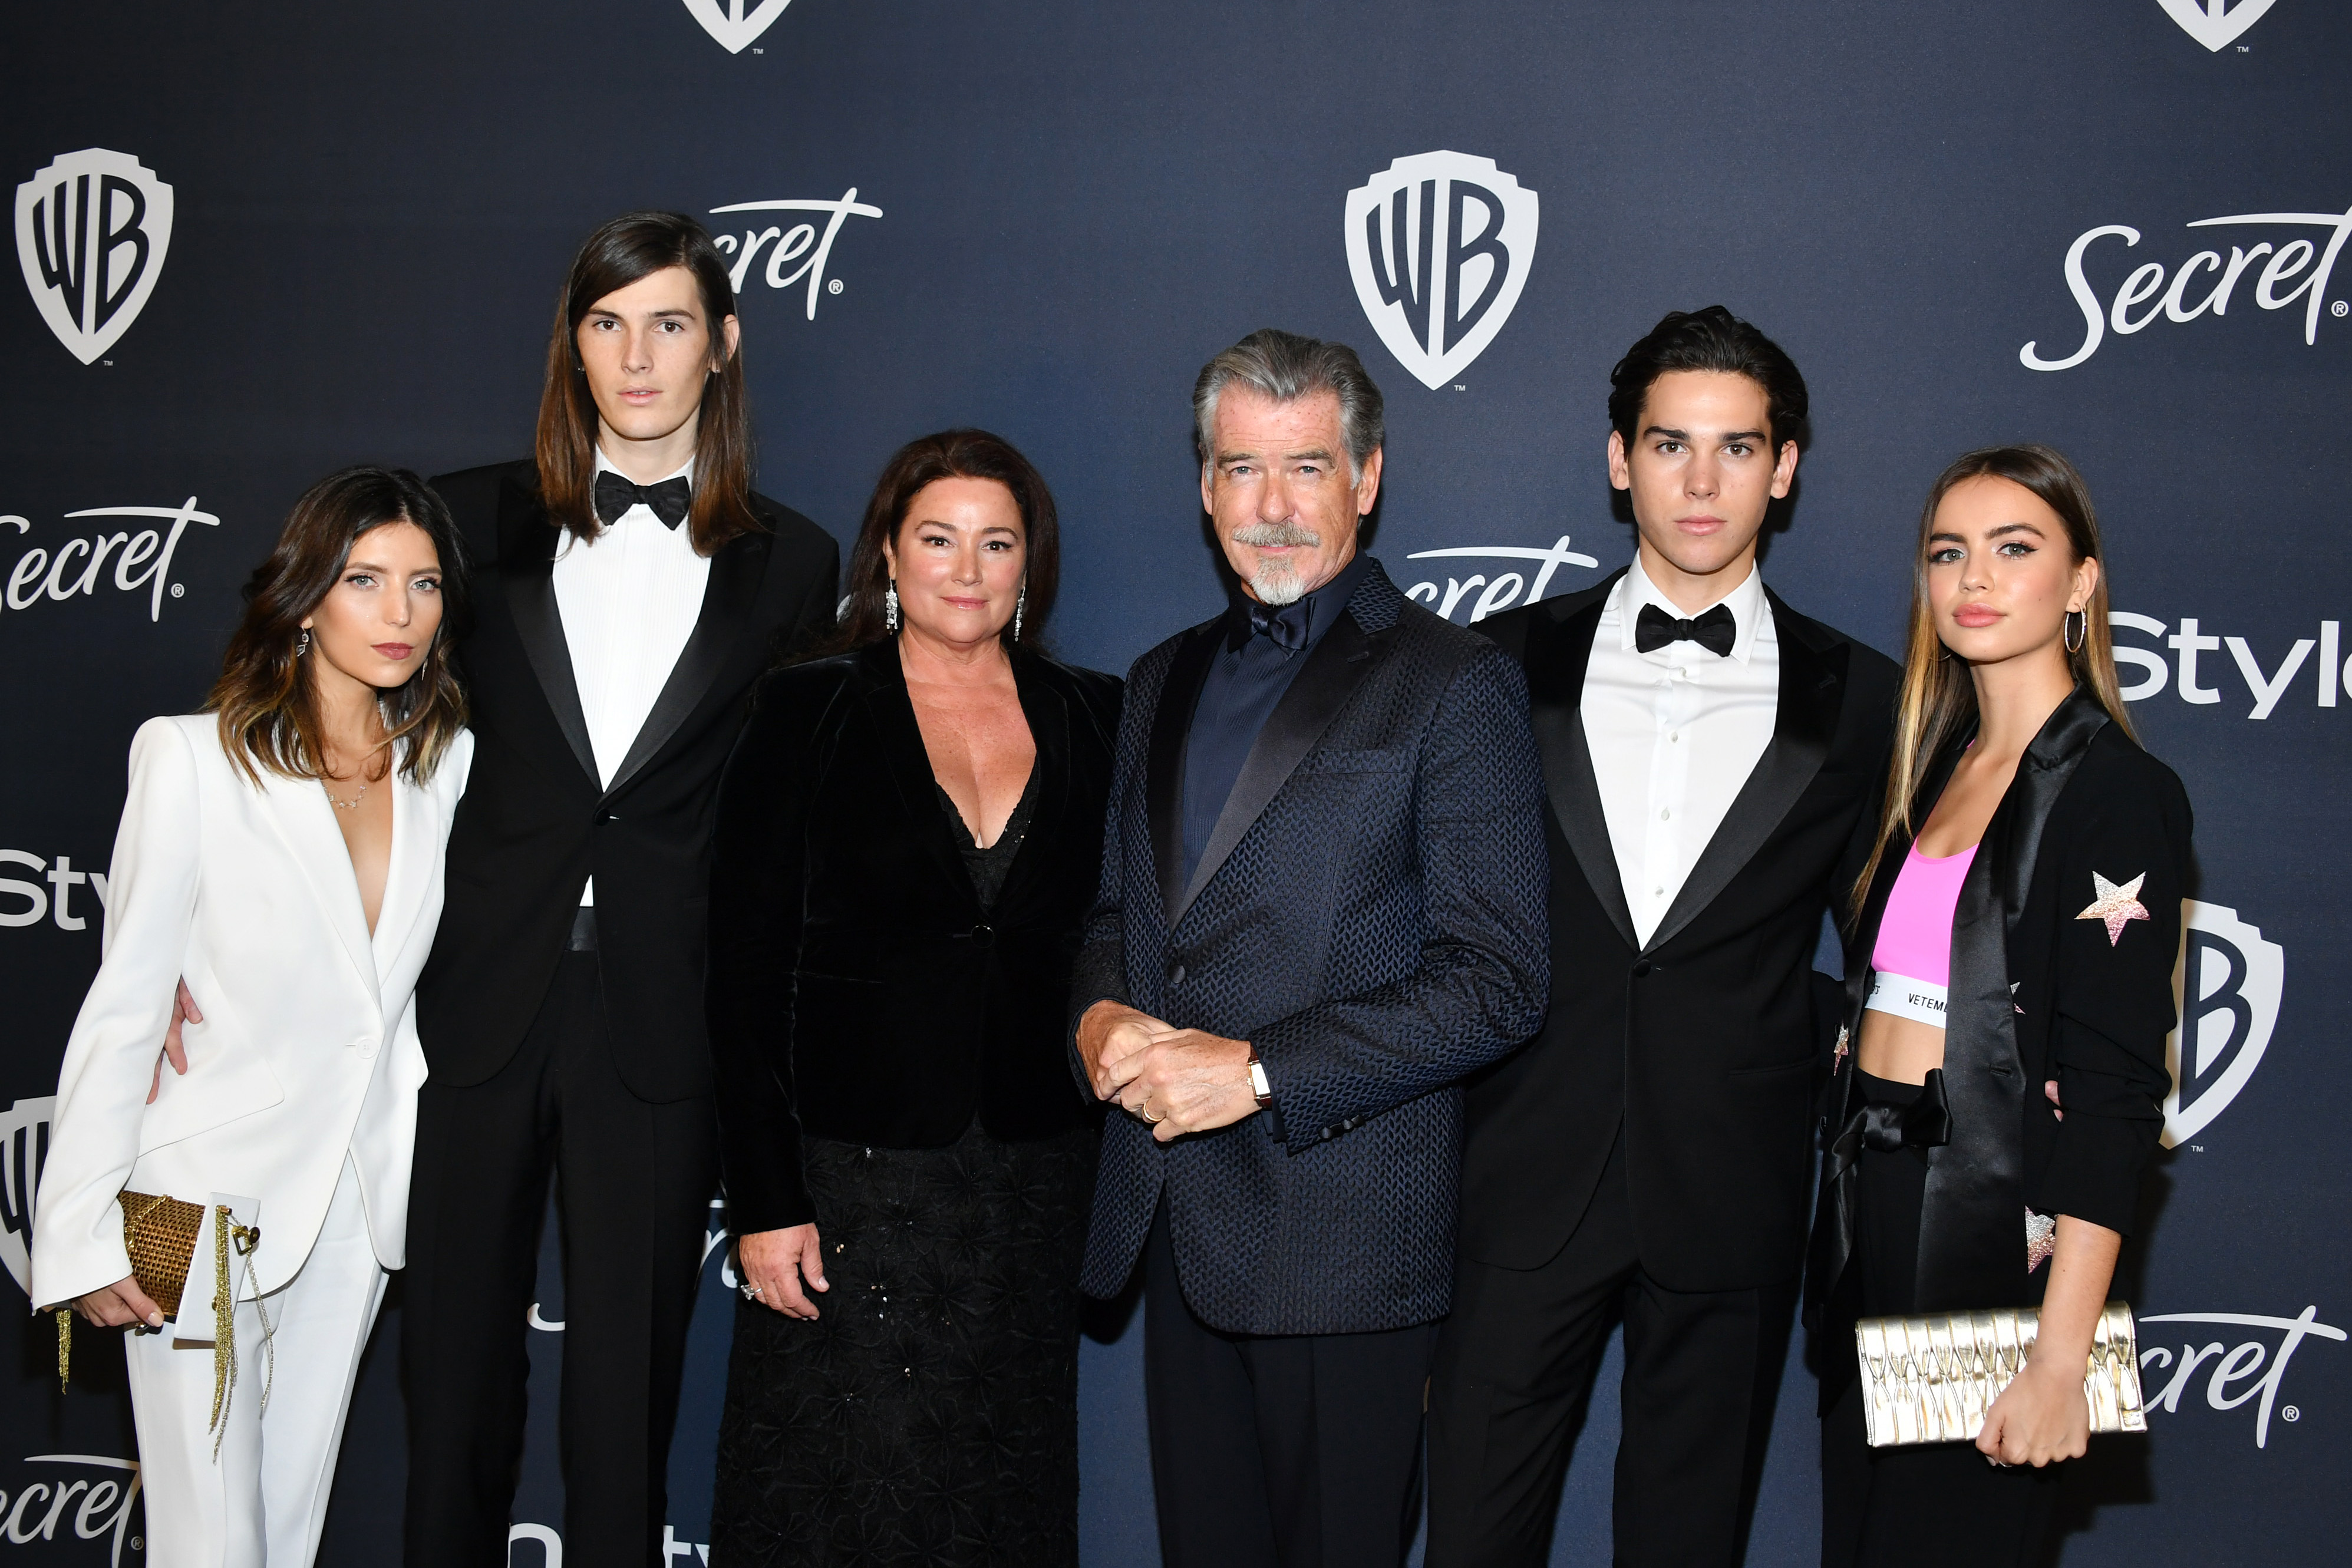 Dylan Brosnan, Keely Shaye Brosnan, Pierce Brosnan, Paris Brosnan, and two guests at the 21st Annual Warner Bros. And InStyle Golden Globe After Party held at The Beverly Hilton Hotel in Beverly Hills, California, on January 05, 2020. | Source: Getty Images